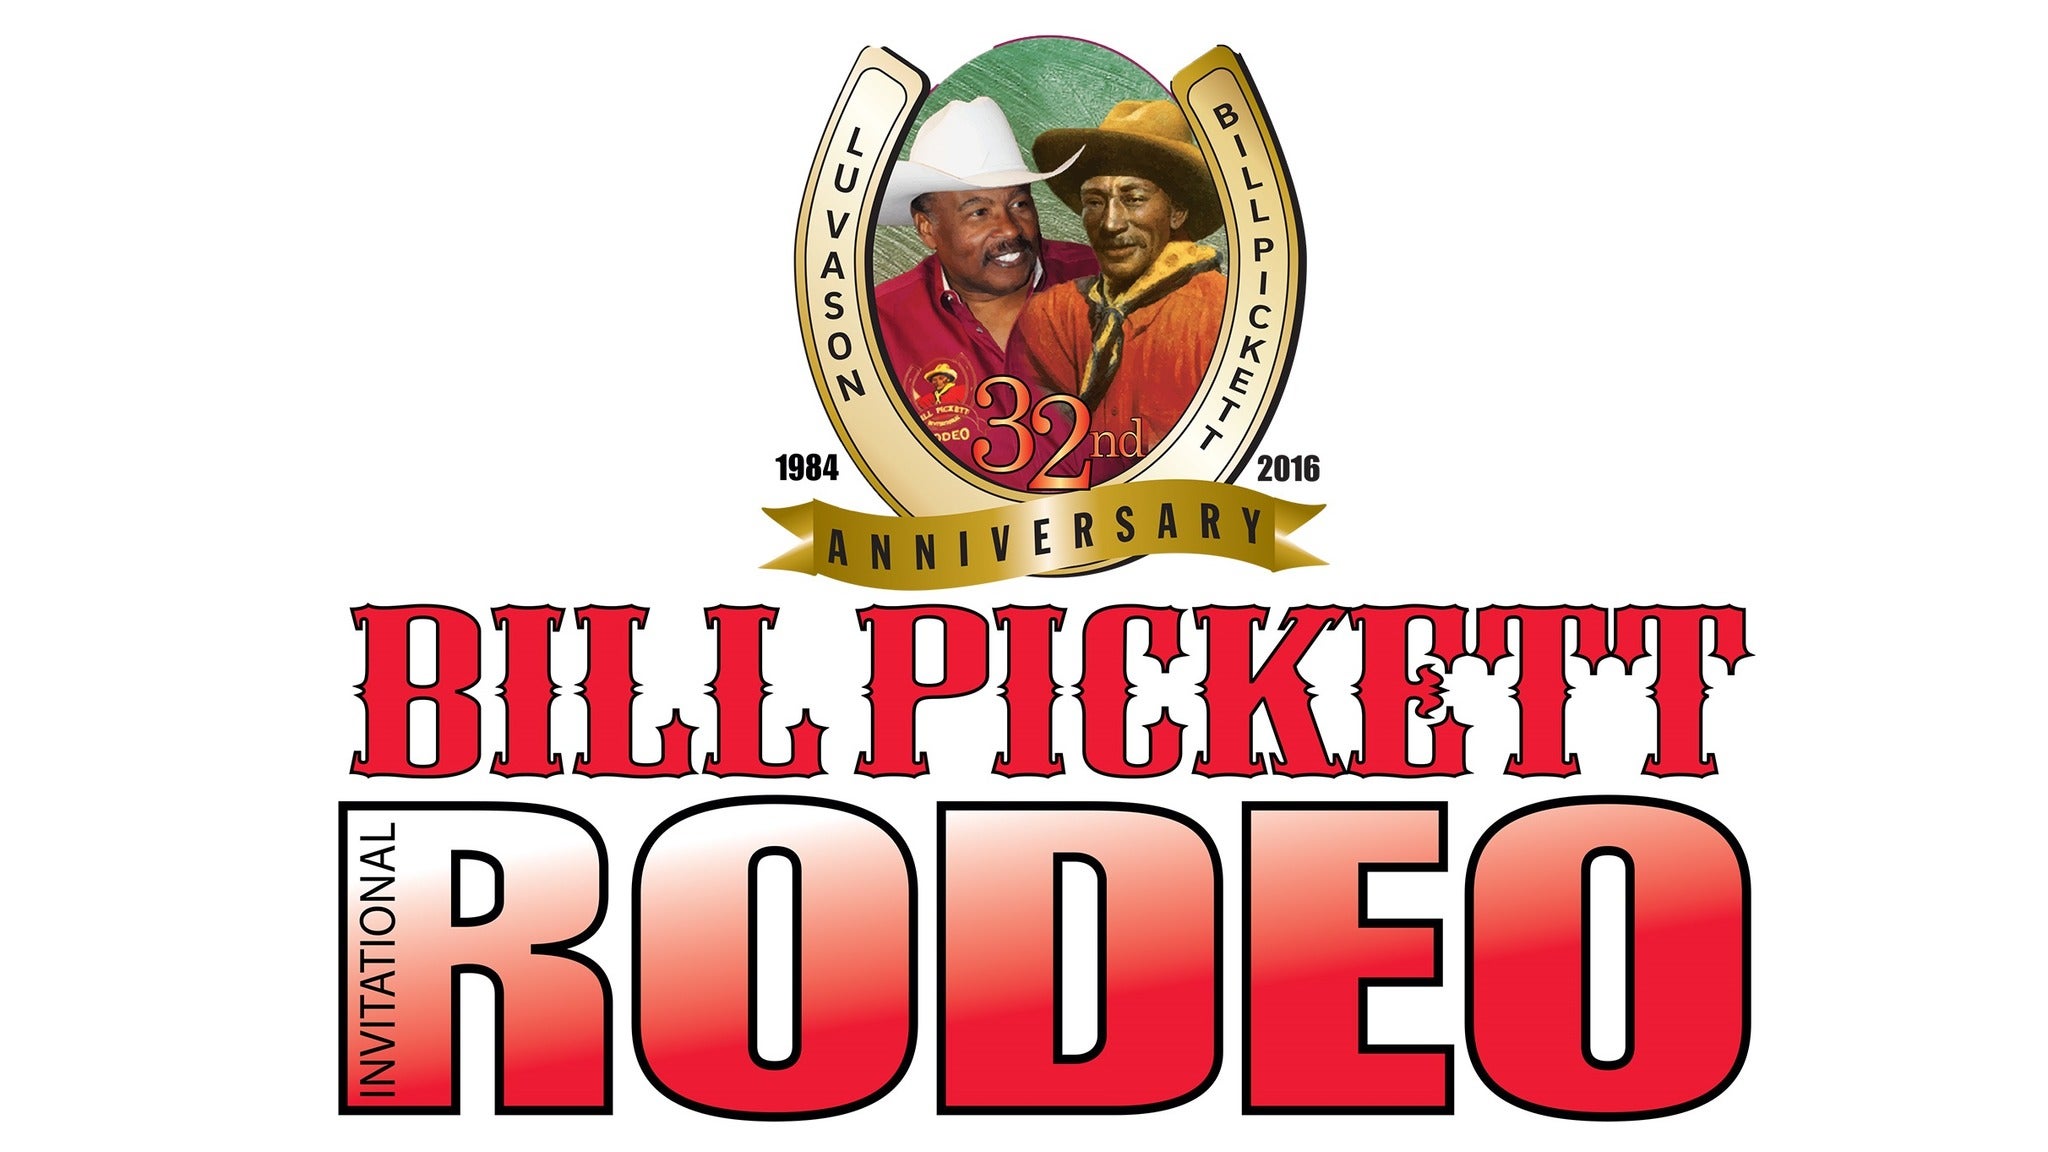 Image used with permission from Ticketmaster | Bill Pickett Invitational Rodeo tickets